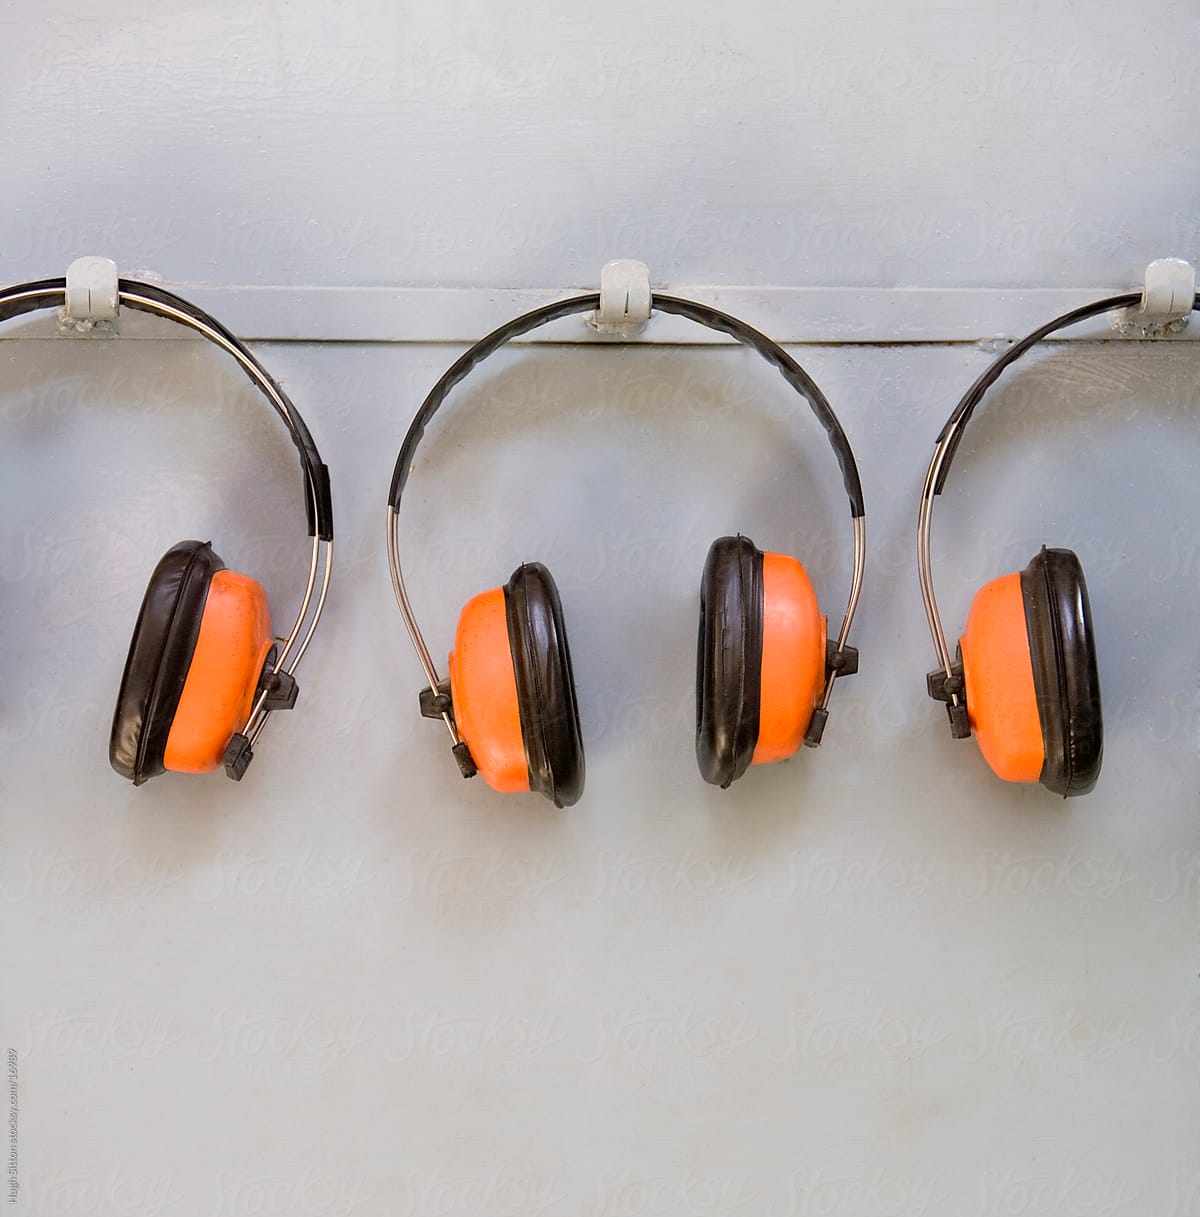 Ear defenders hanging on factory wall.